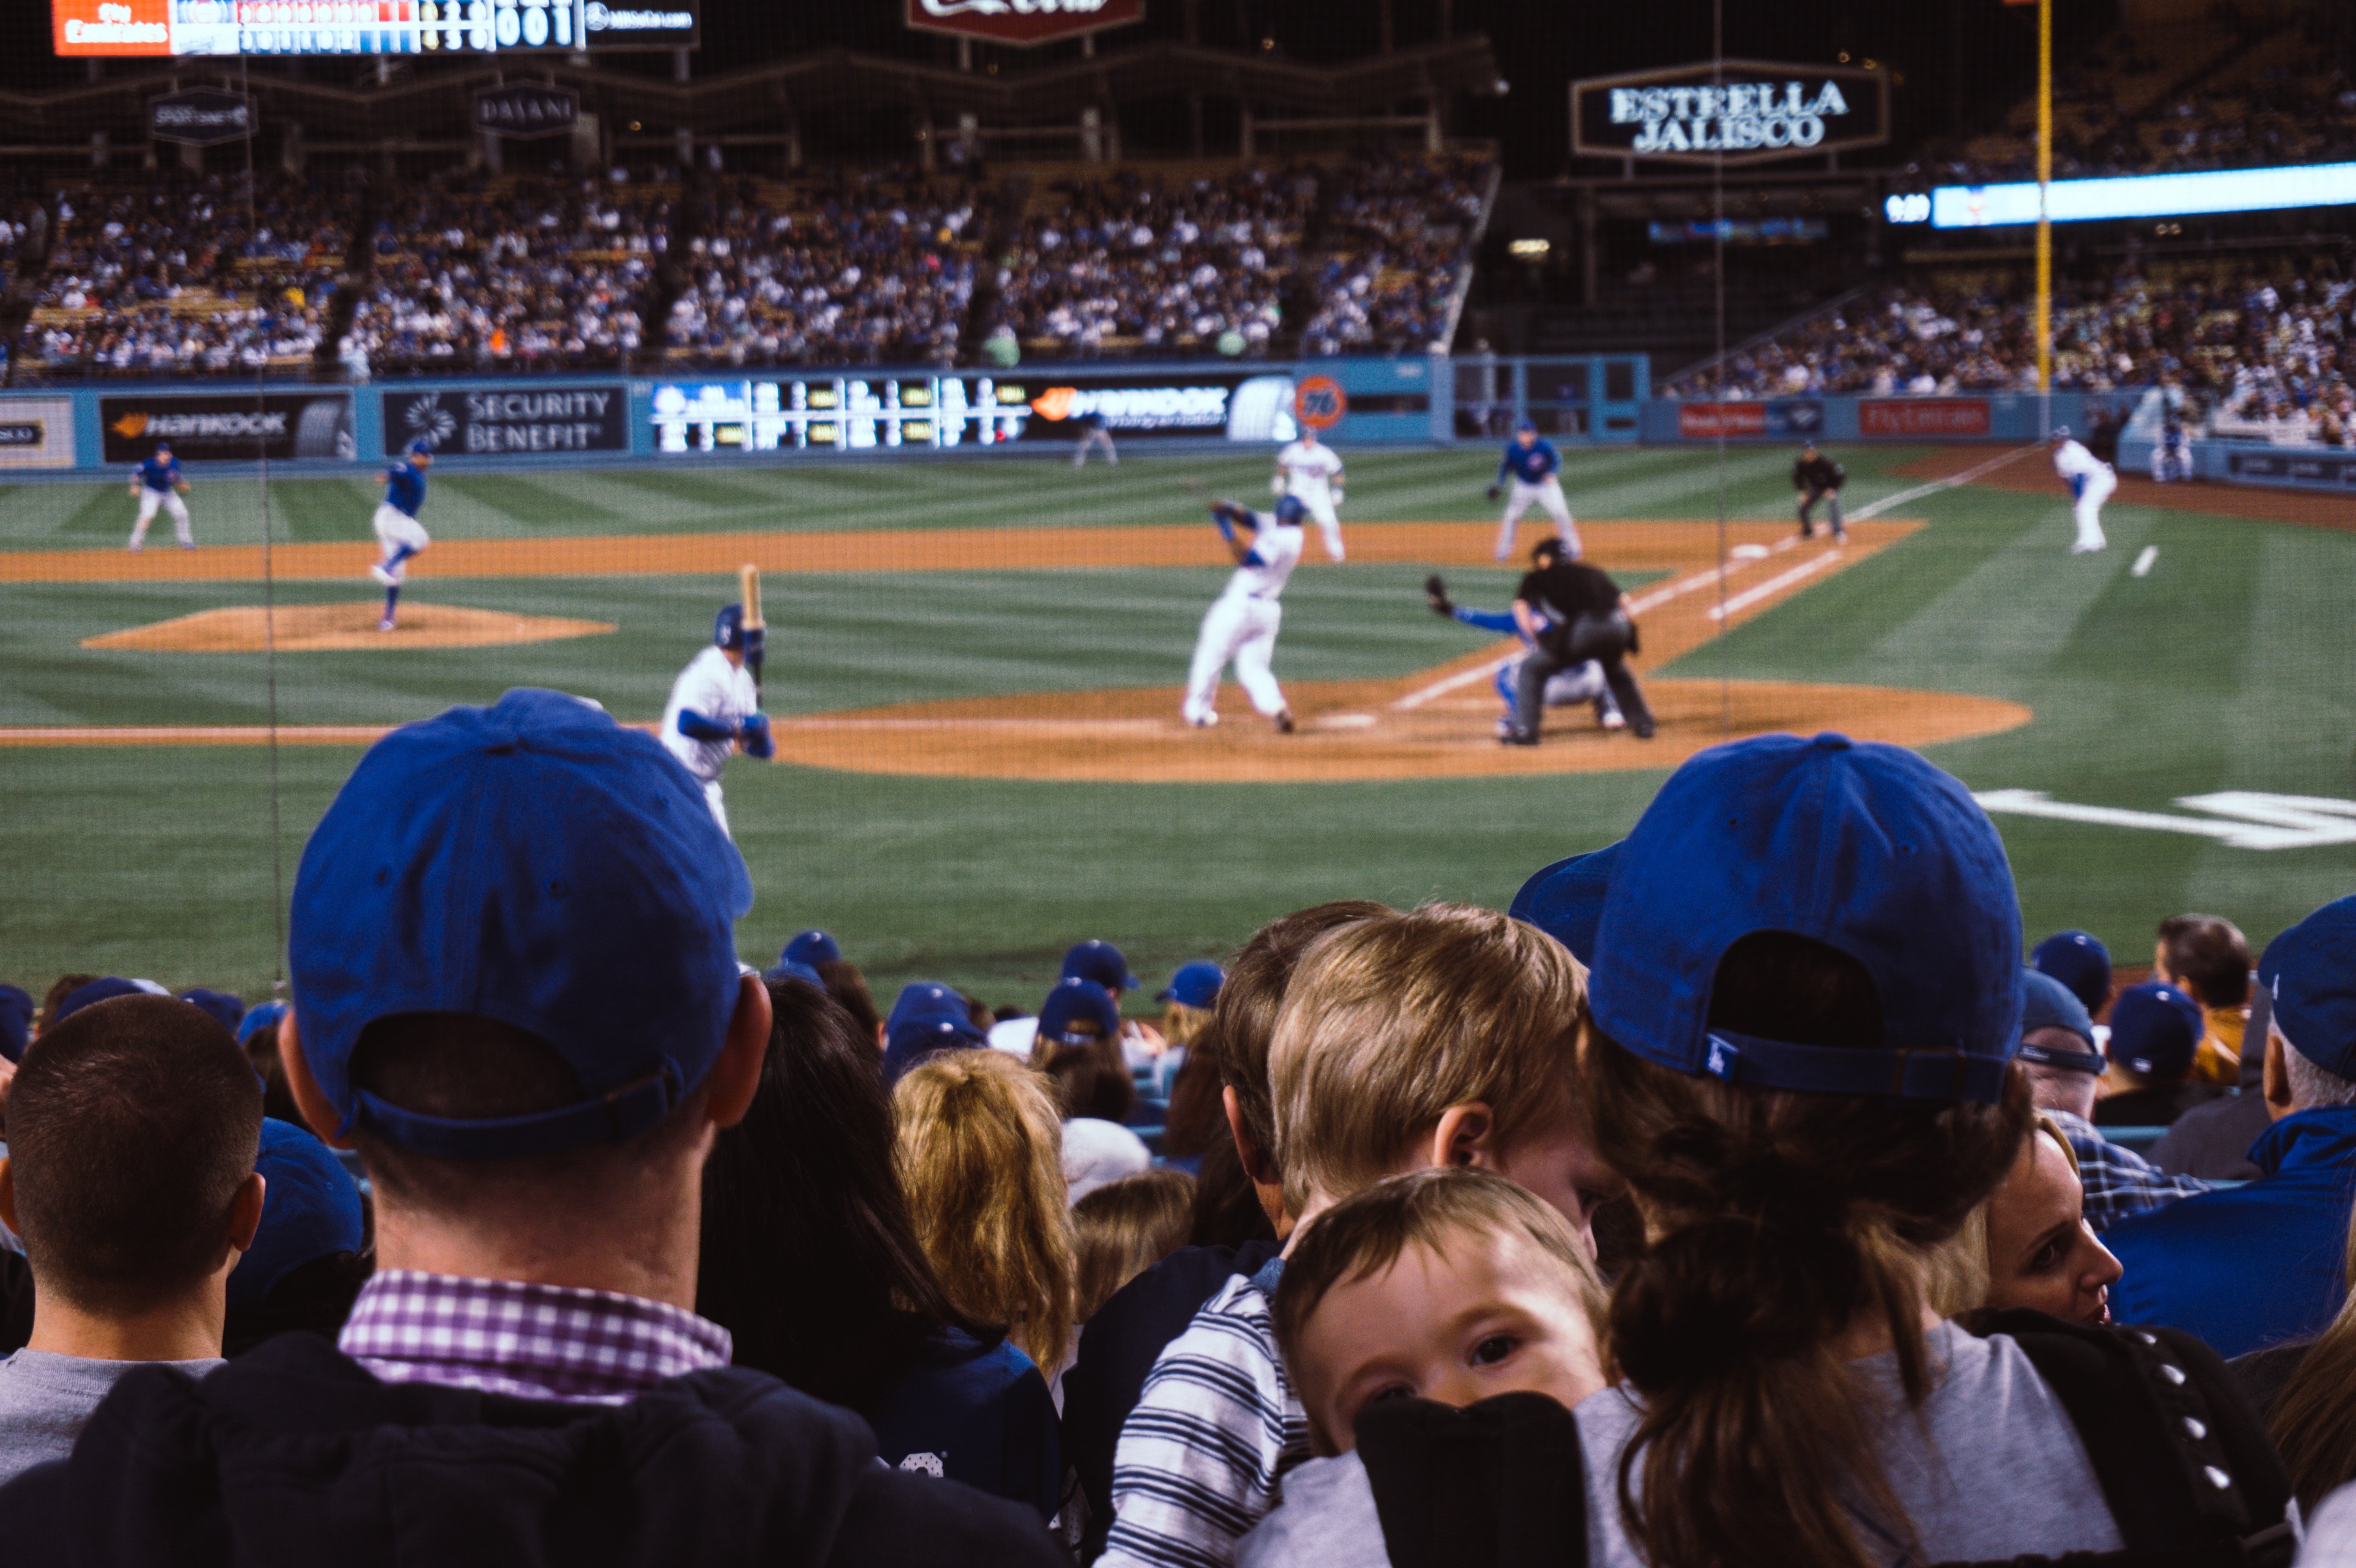 A Crowd watching a baseball game